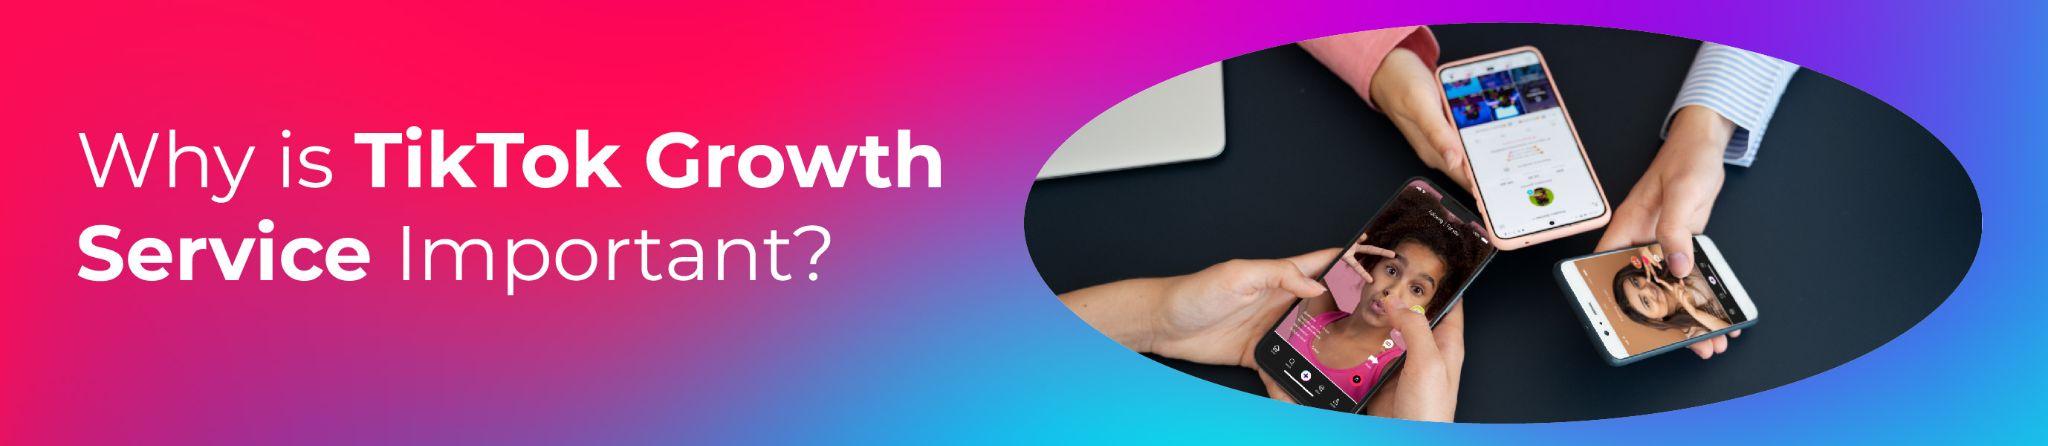 Why is TikTok Growth Service Important?